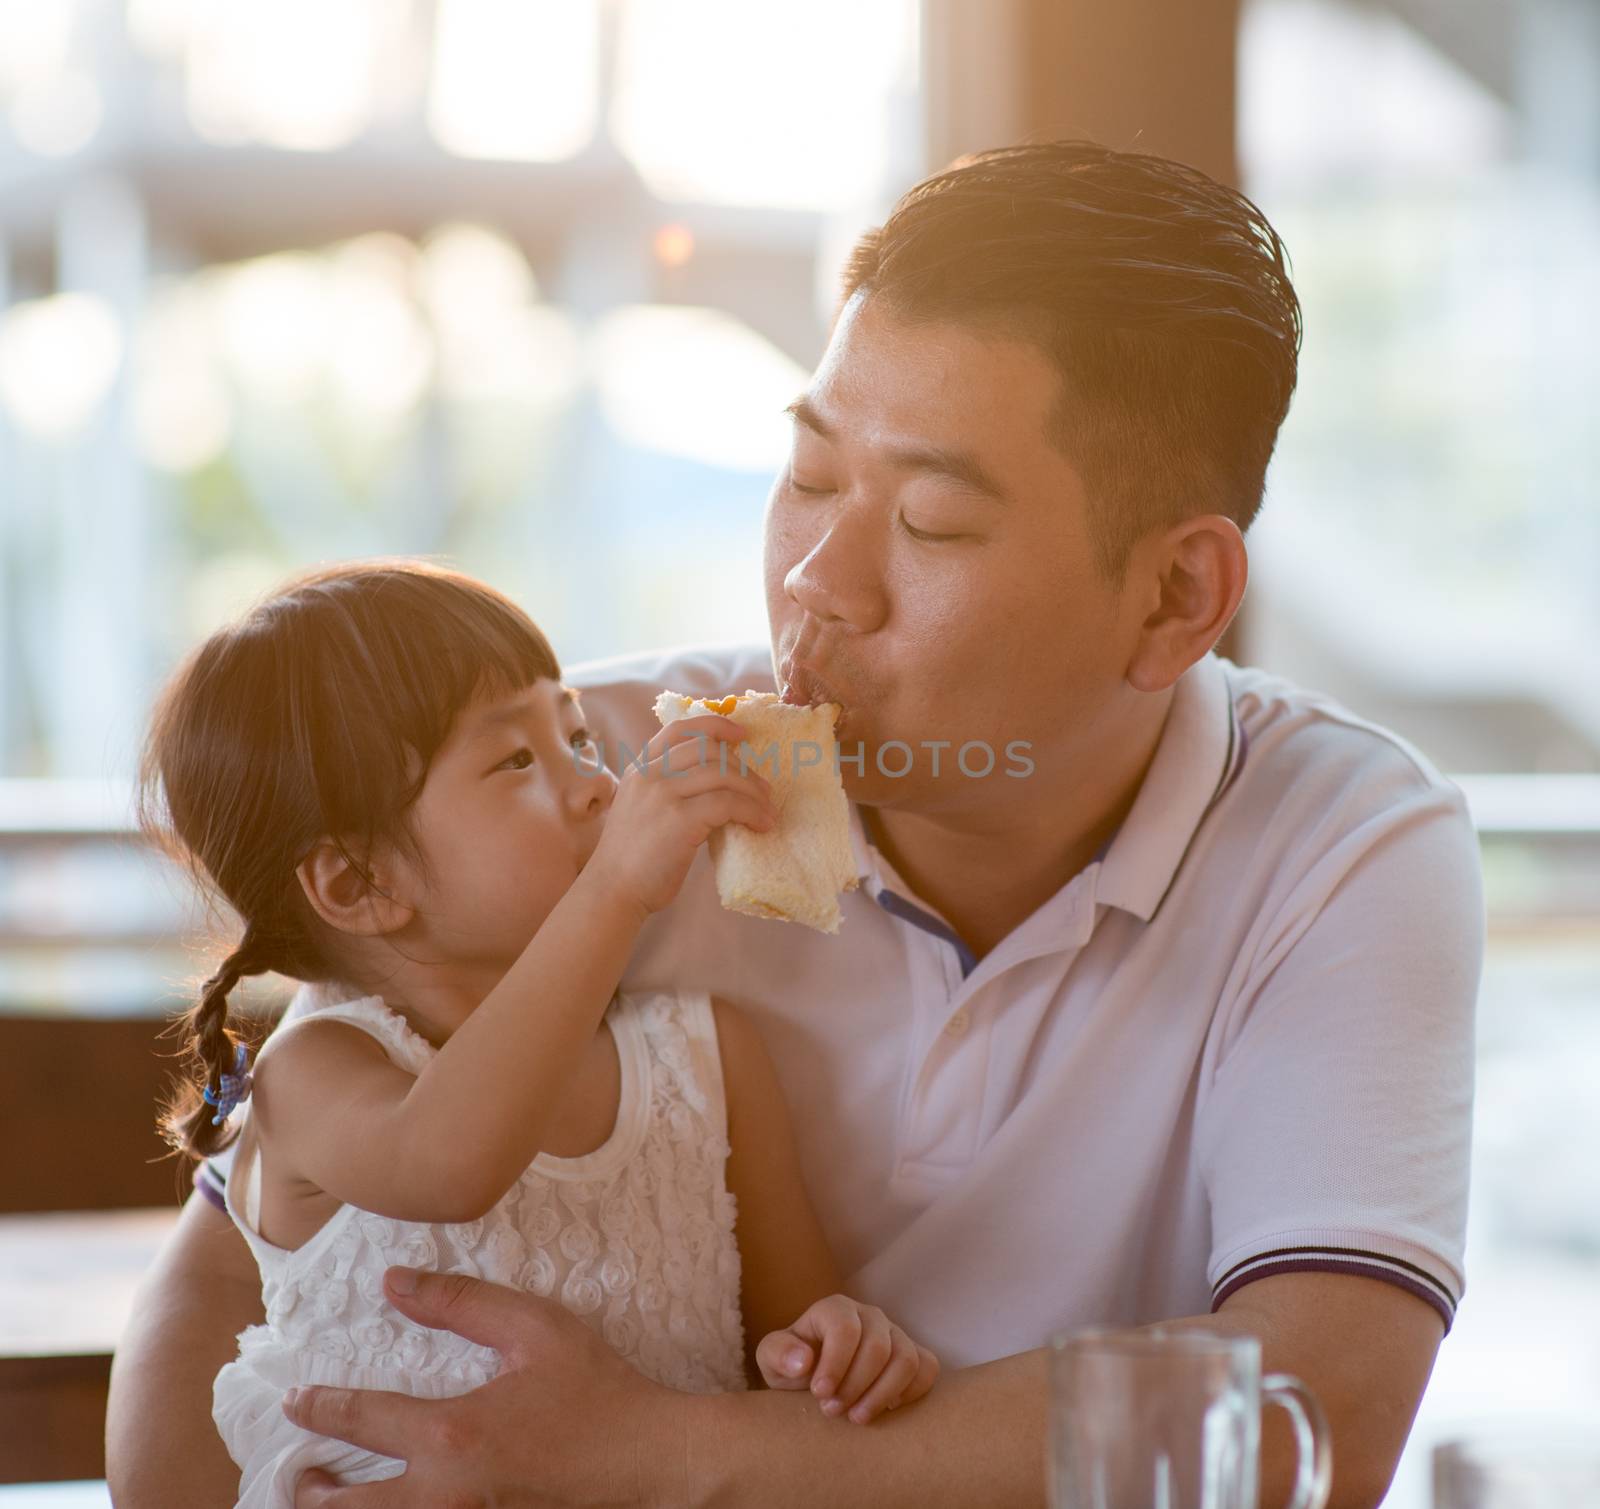 Daughter feeding bread to daddy at cafeteria. Asian family outdoor lifestyle with natural light.